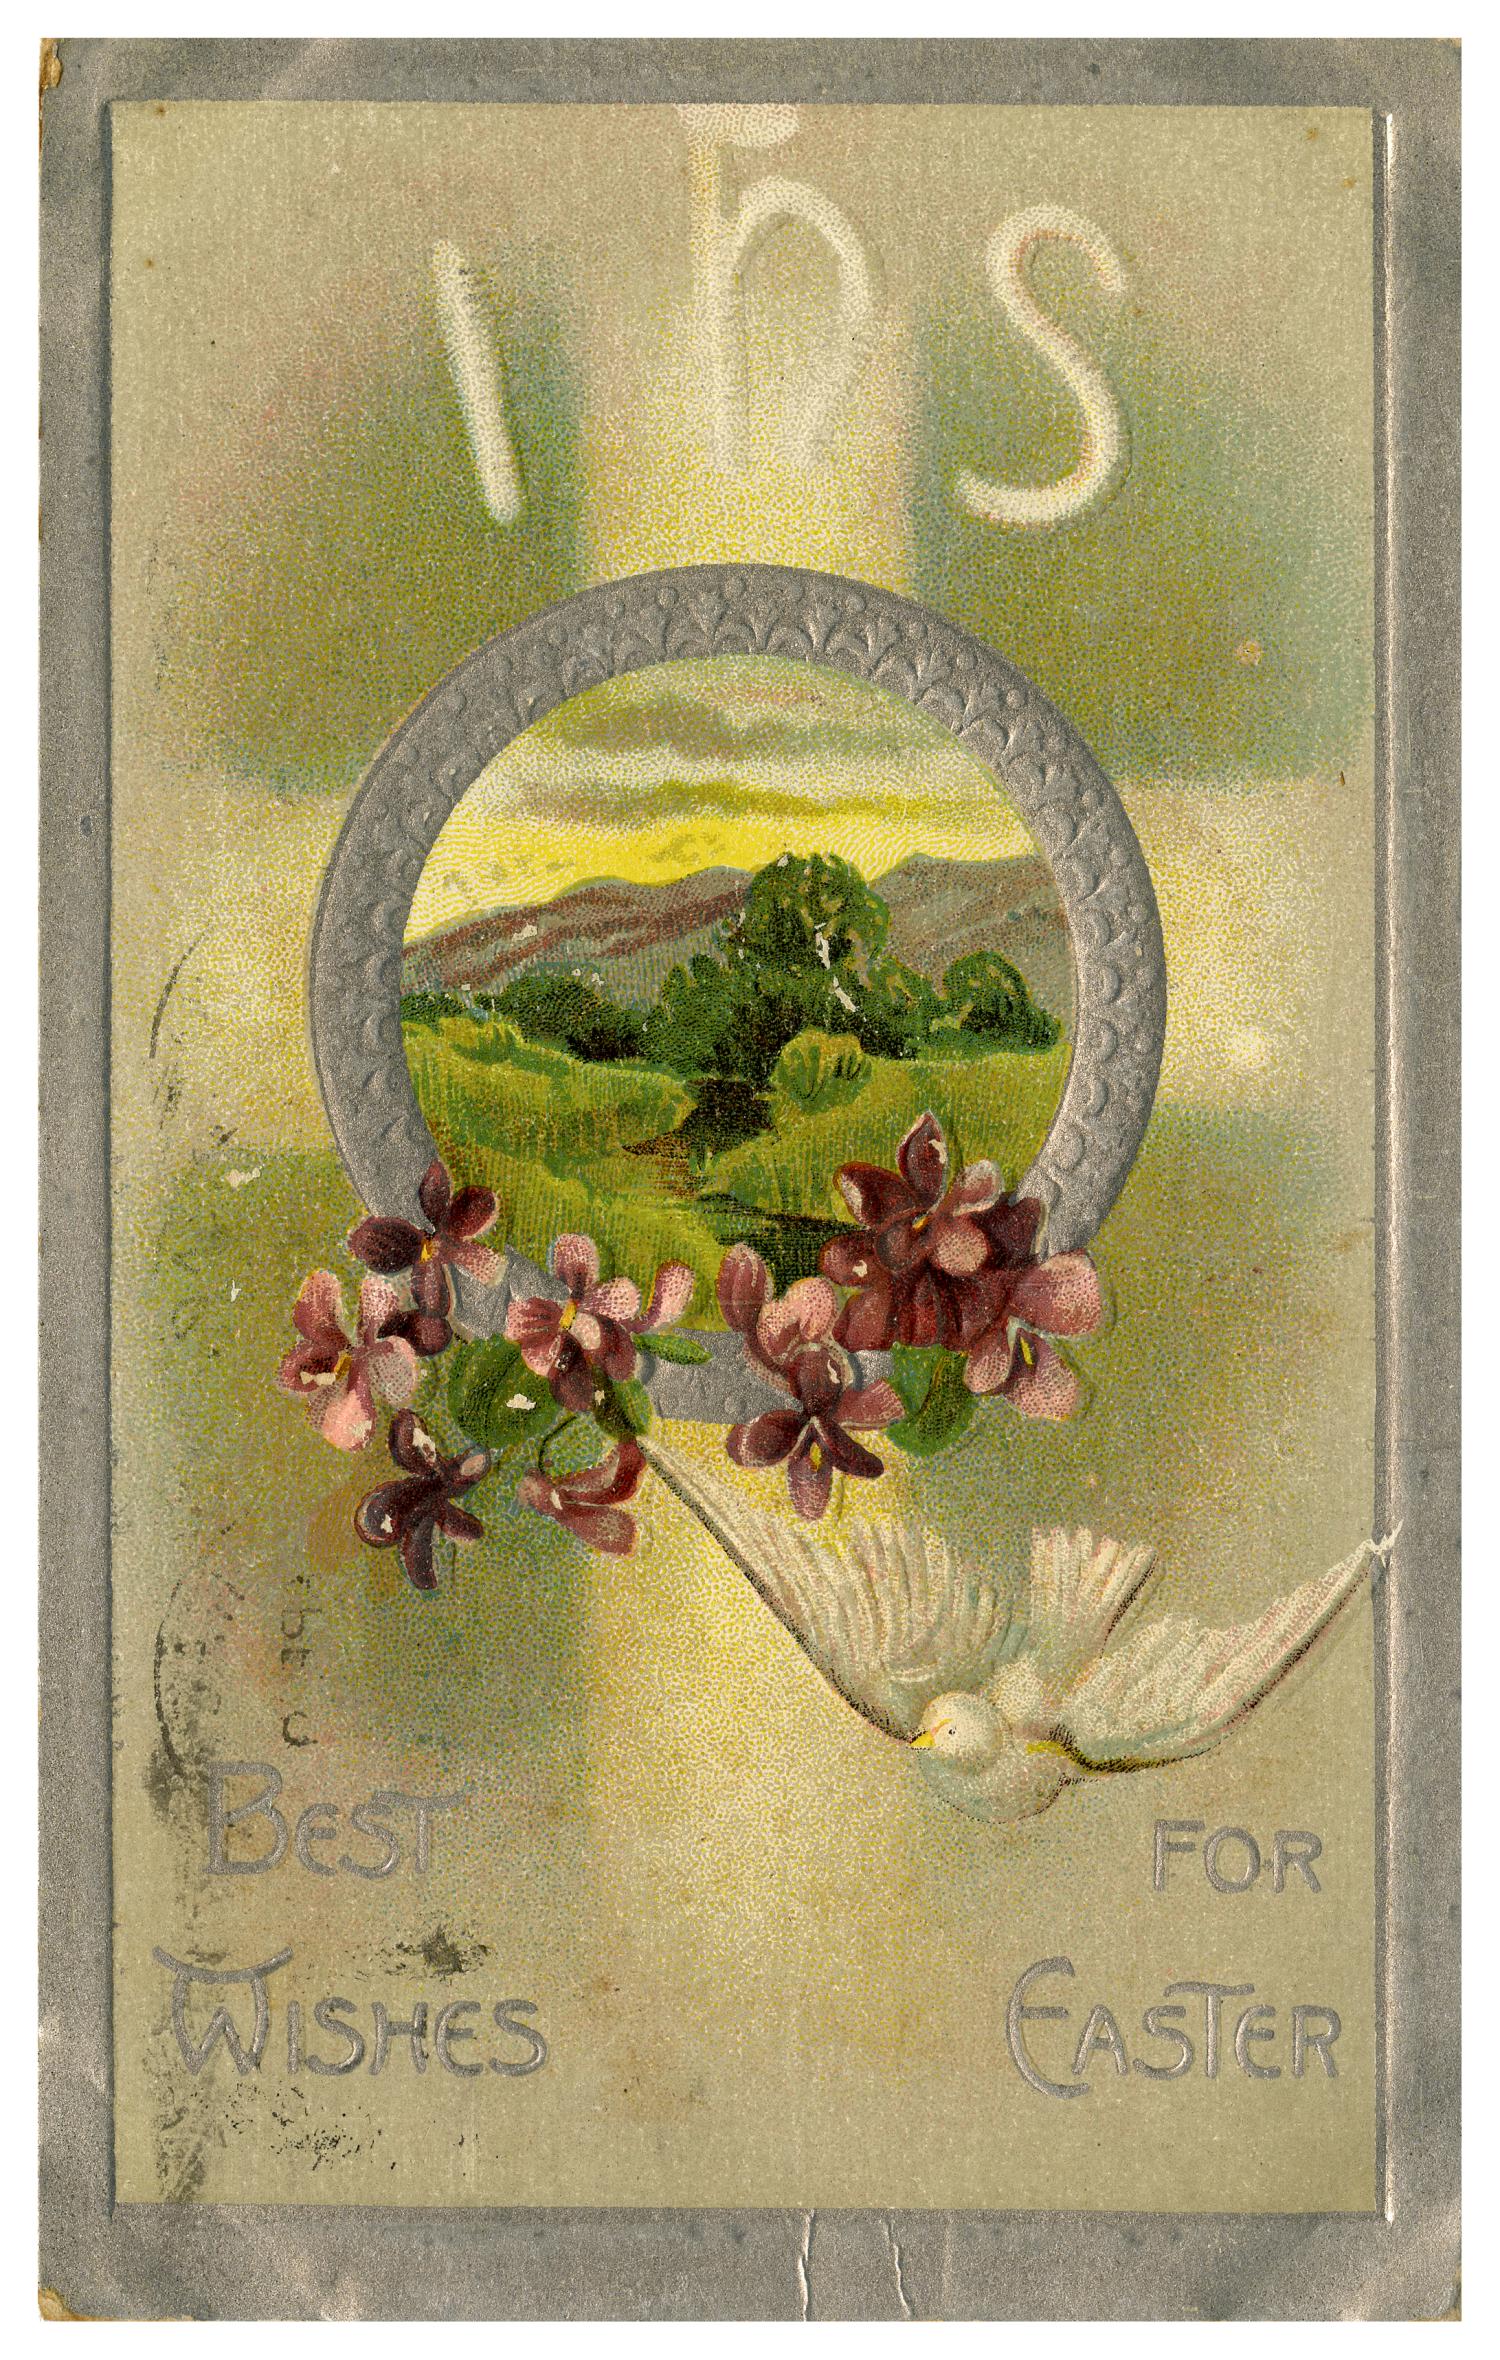 Best Wishes for Easter - The Portal to Texas History